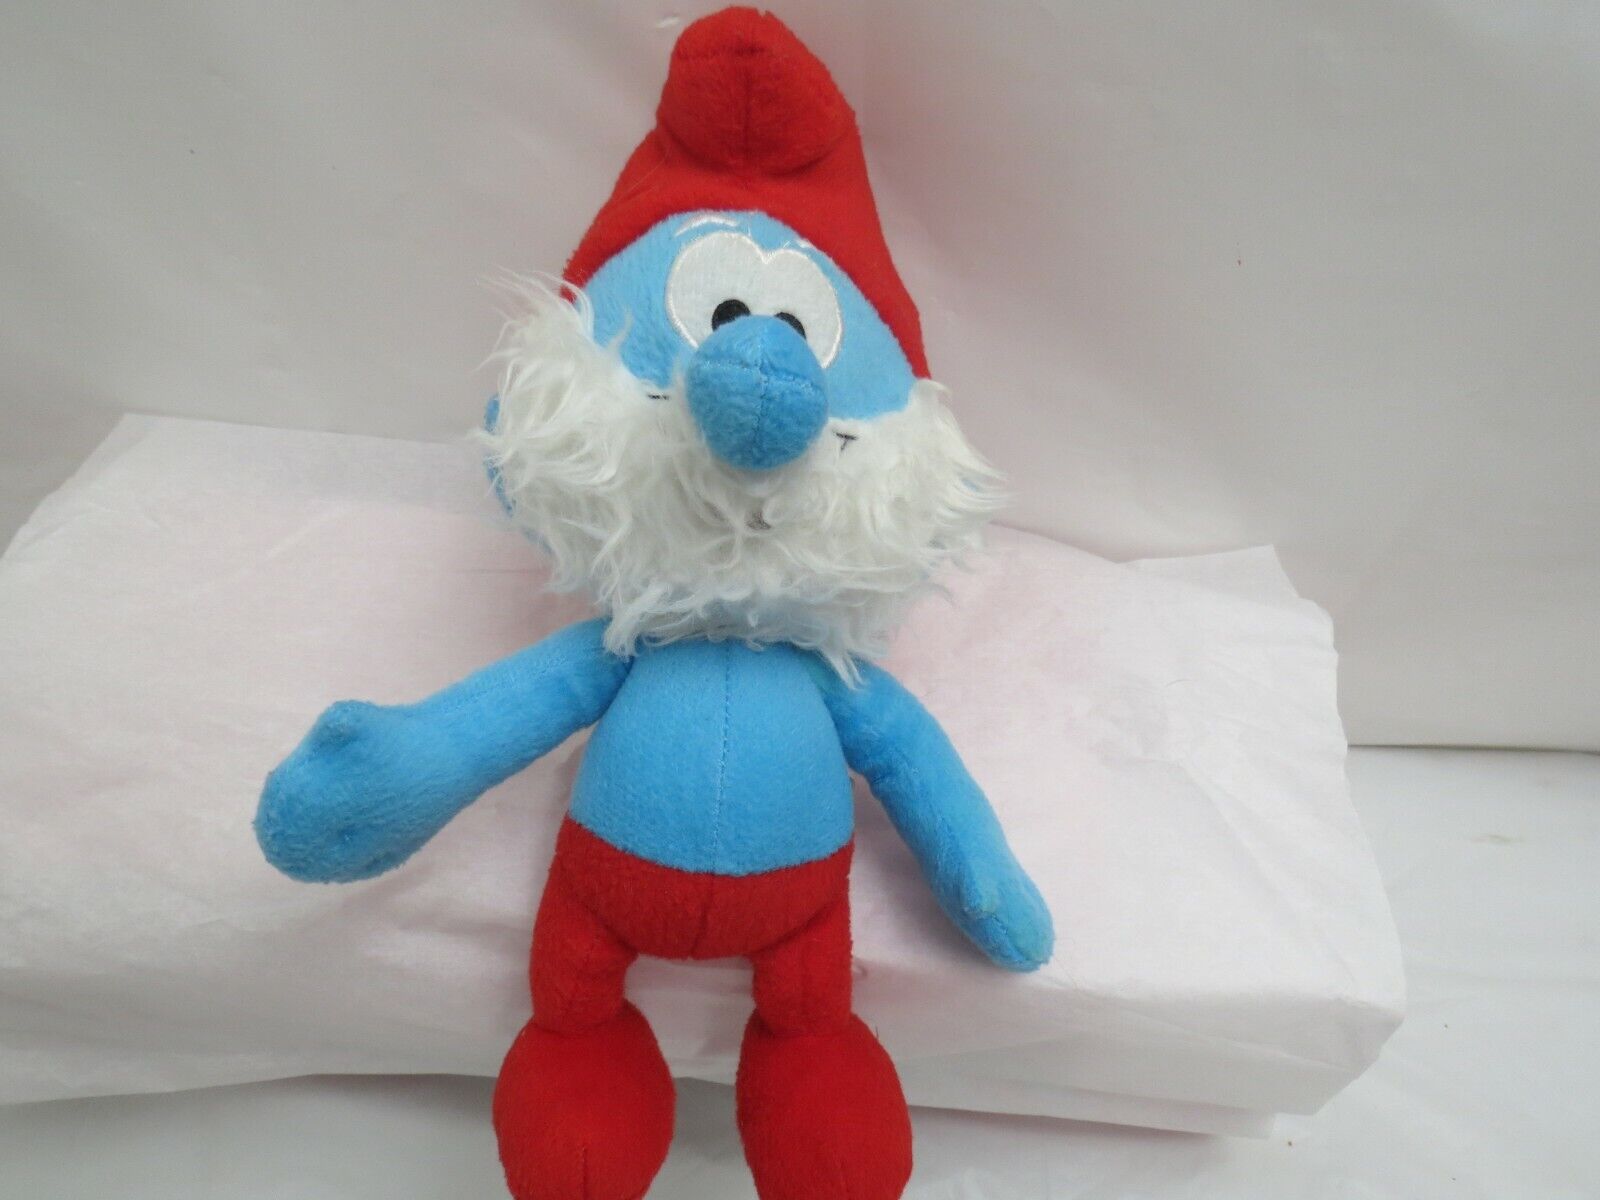 SUPER CLEARANCE THE SMURFS PAPPA SMURF PLUSH DOLL